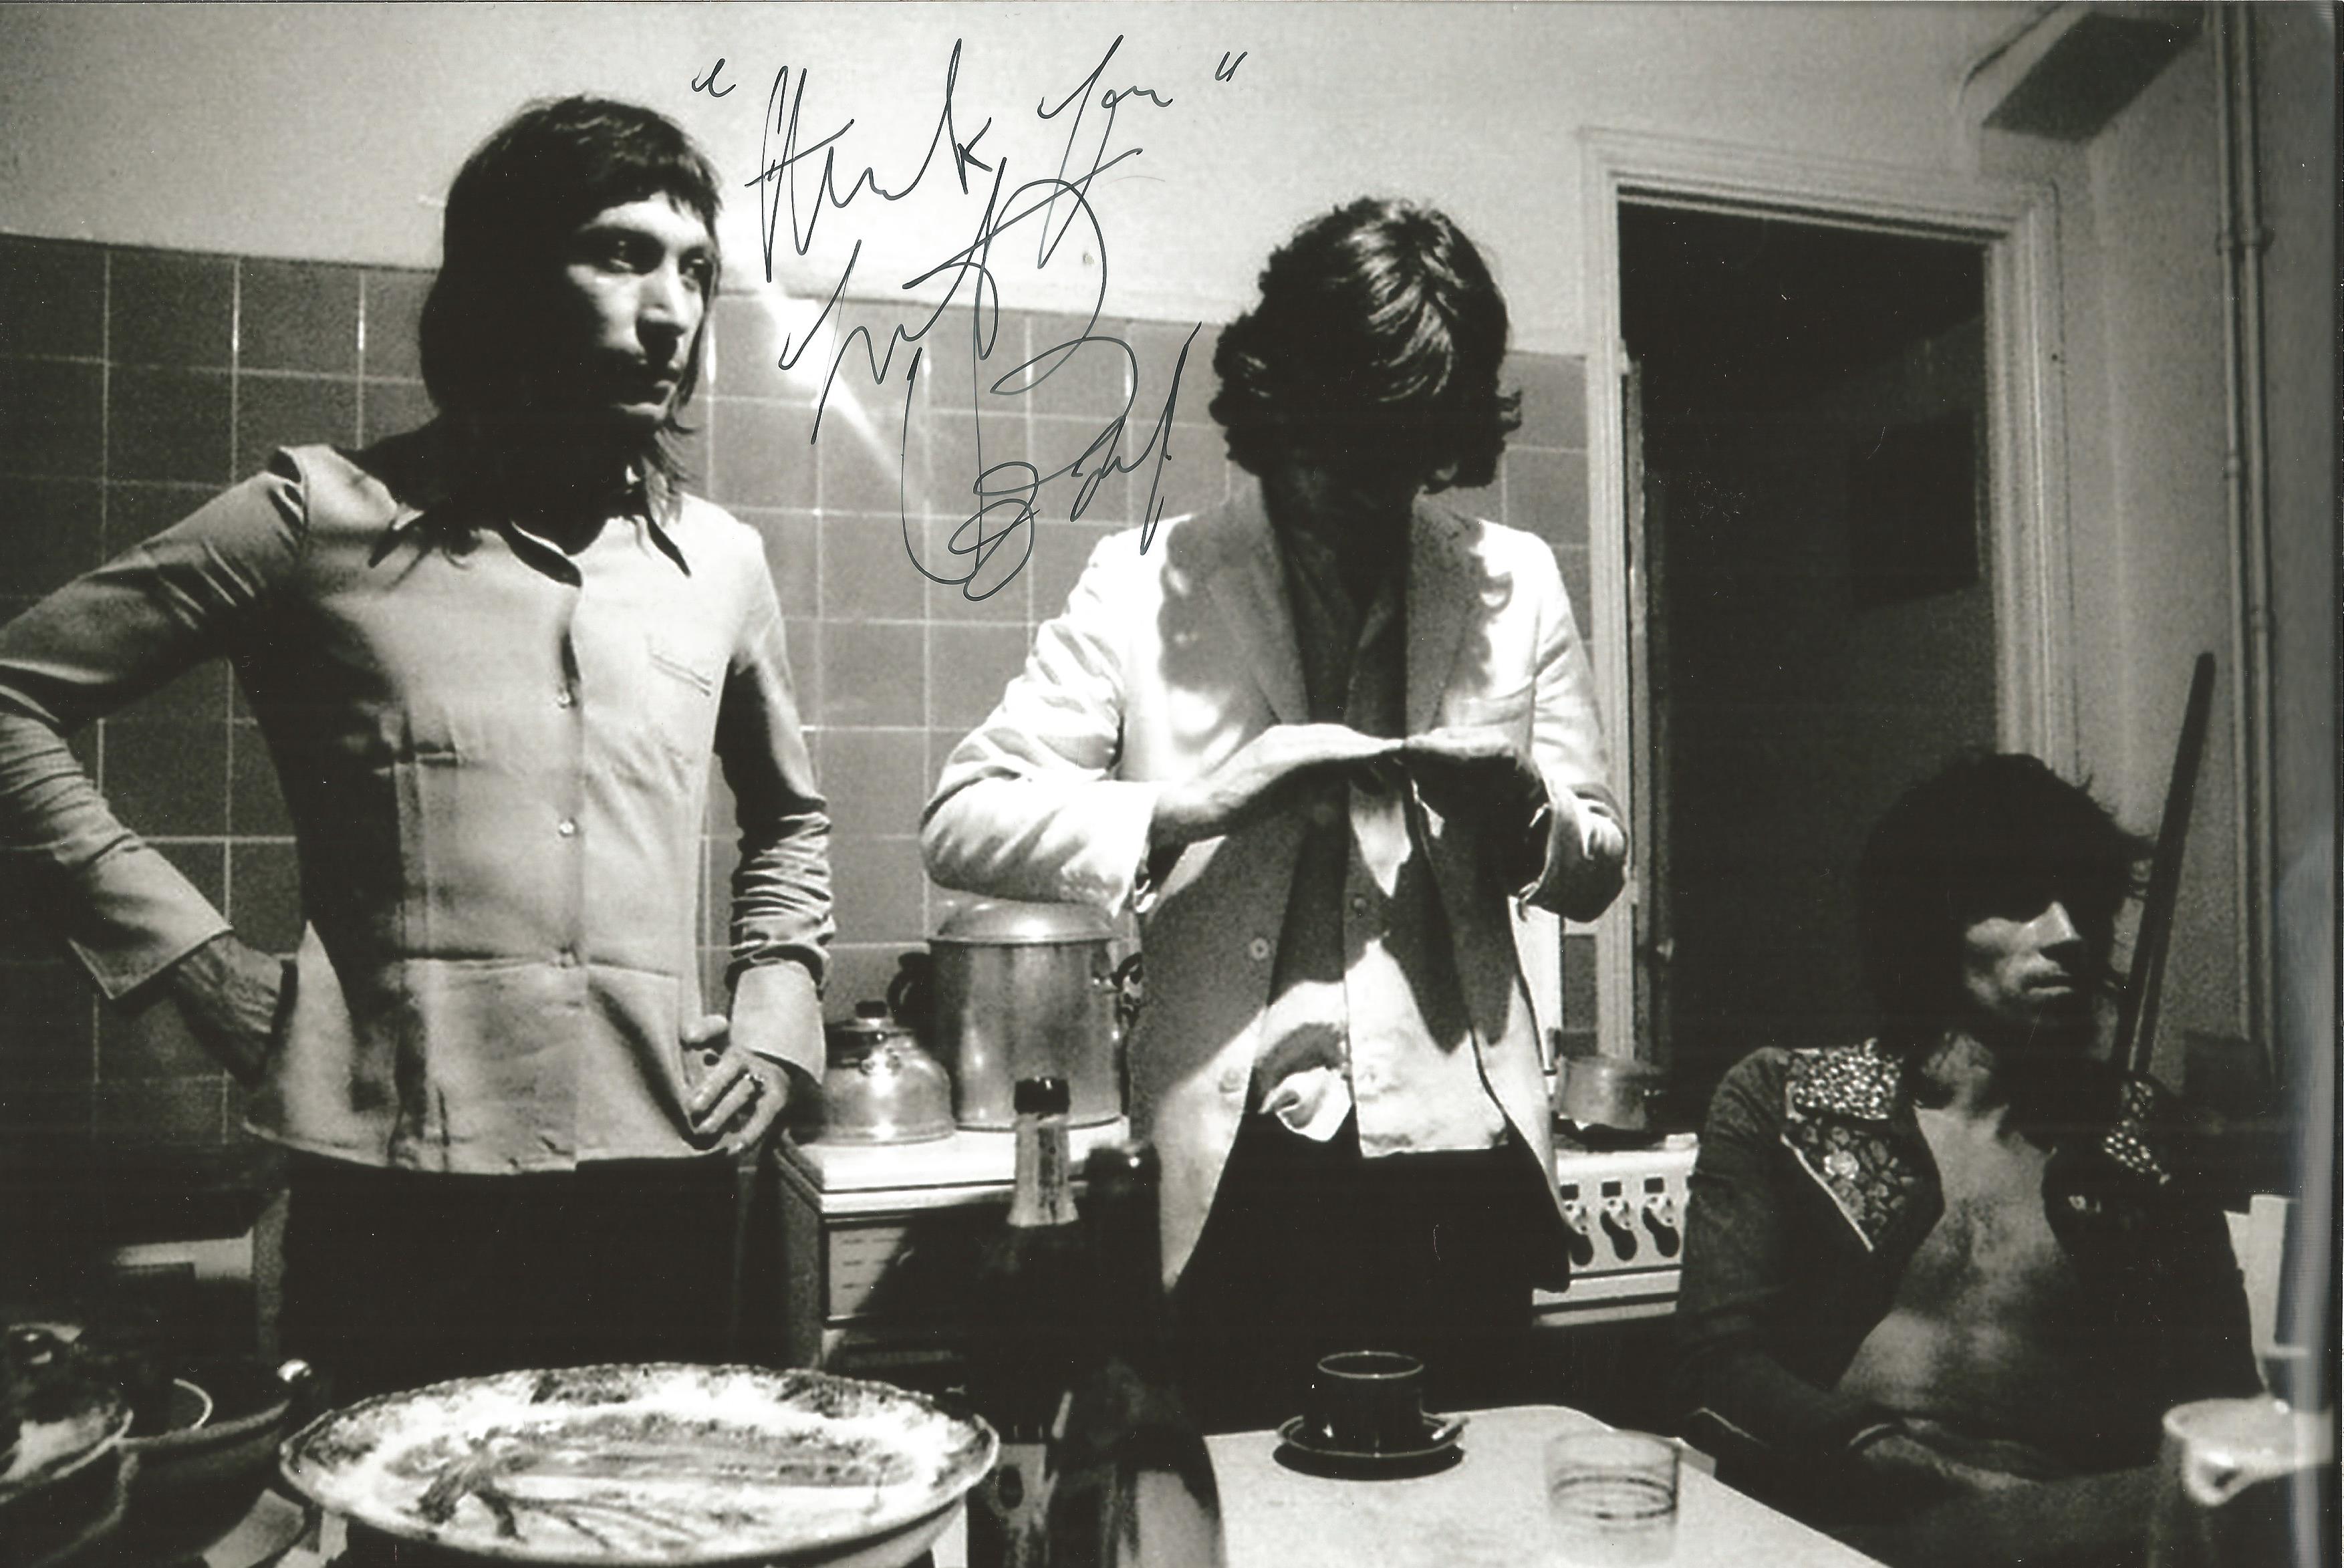 Rolling Stones Charlie Watts signed 12 x 8 inch b/w relaxed band photo in kitchen. Good Condition.